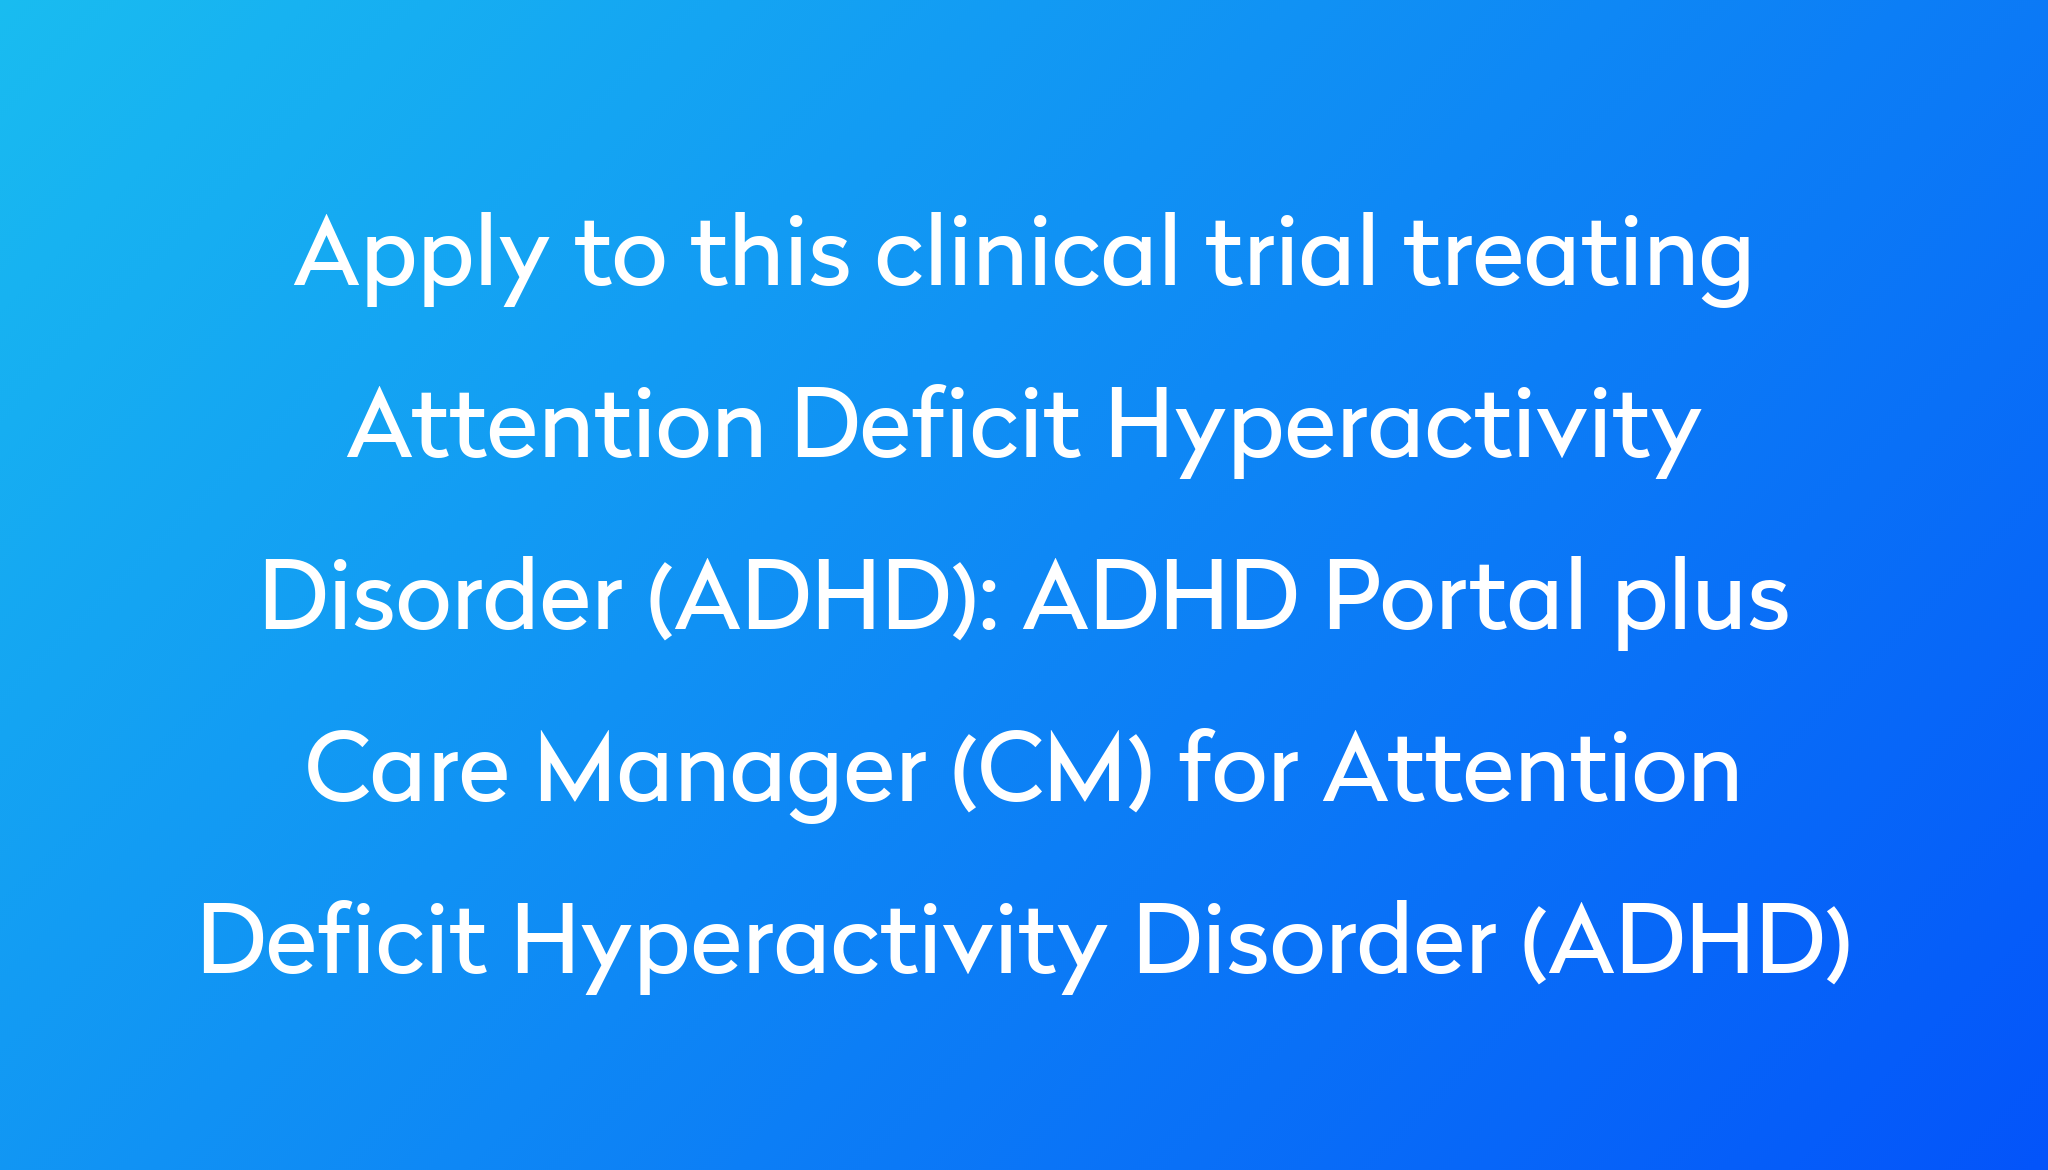 Adhd Portal Plus Care Manager Cm For Attention Deficit Hyperactivity Disorder Adhd Clinical 9212